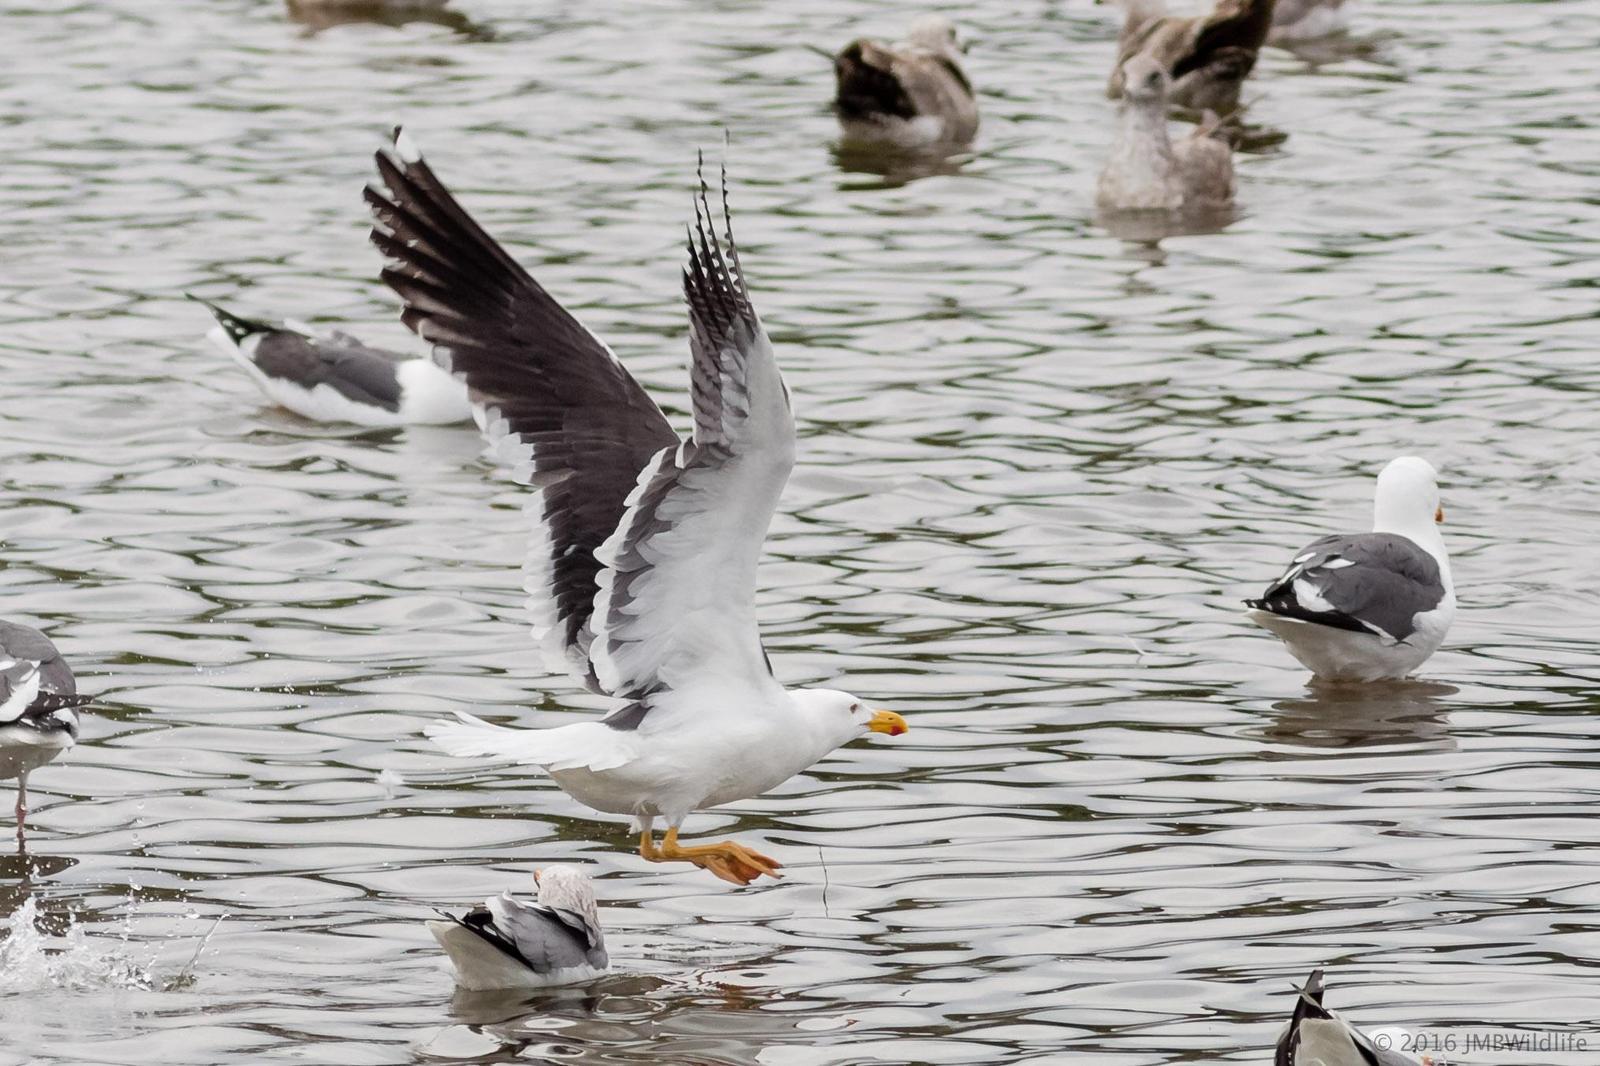 Yellow-footed Gull Photo by Jeff Bray